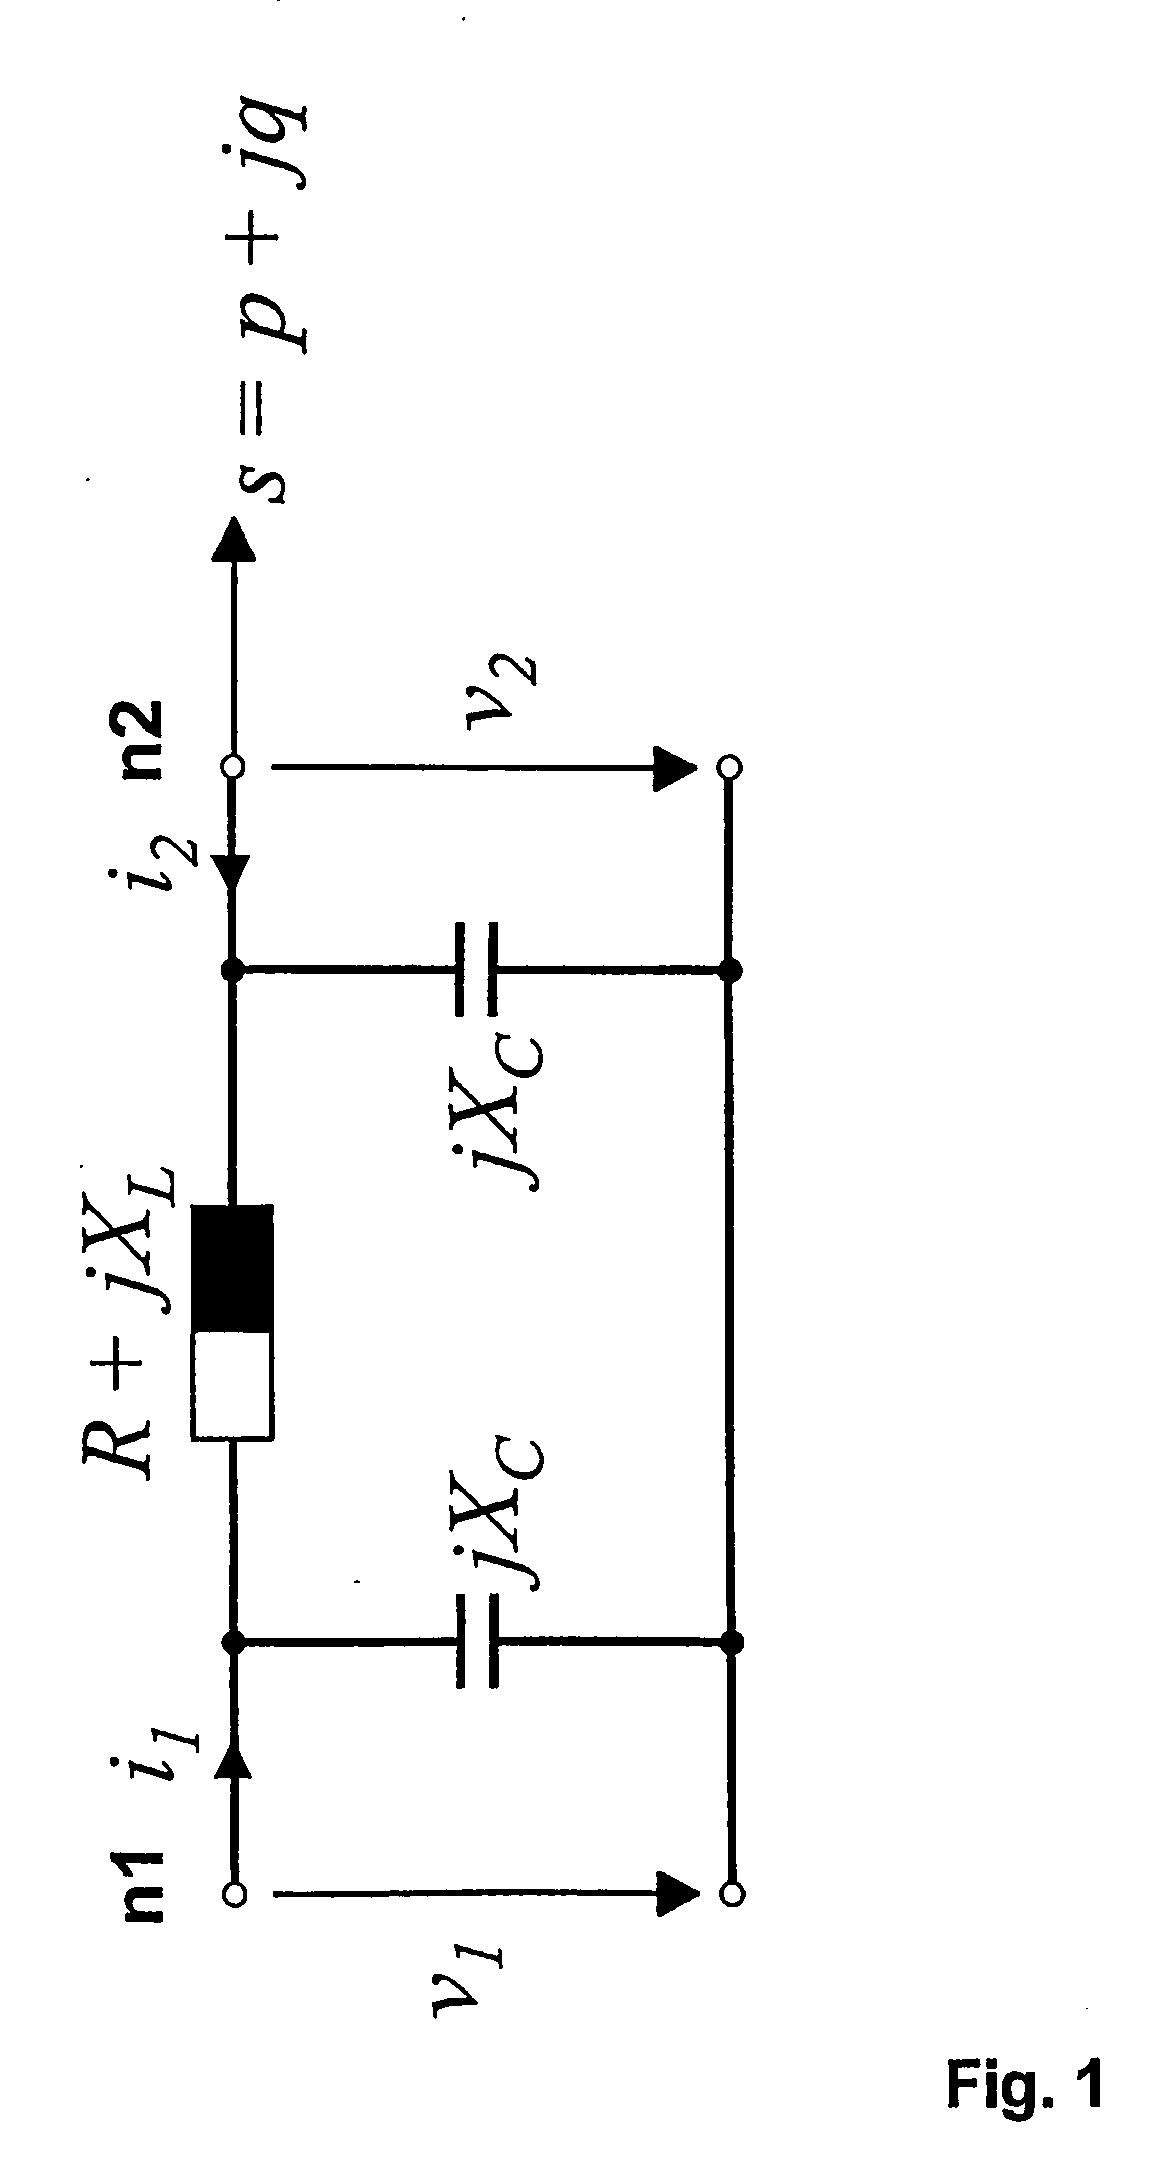 Determining an operational limit of a power transmision line